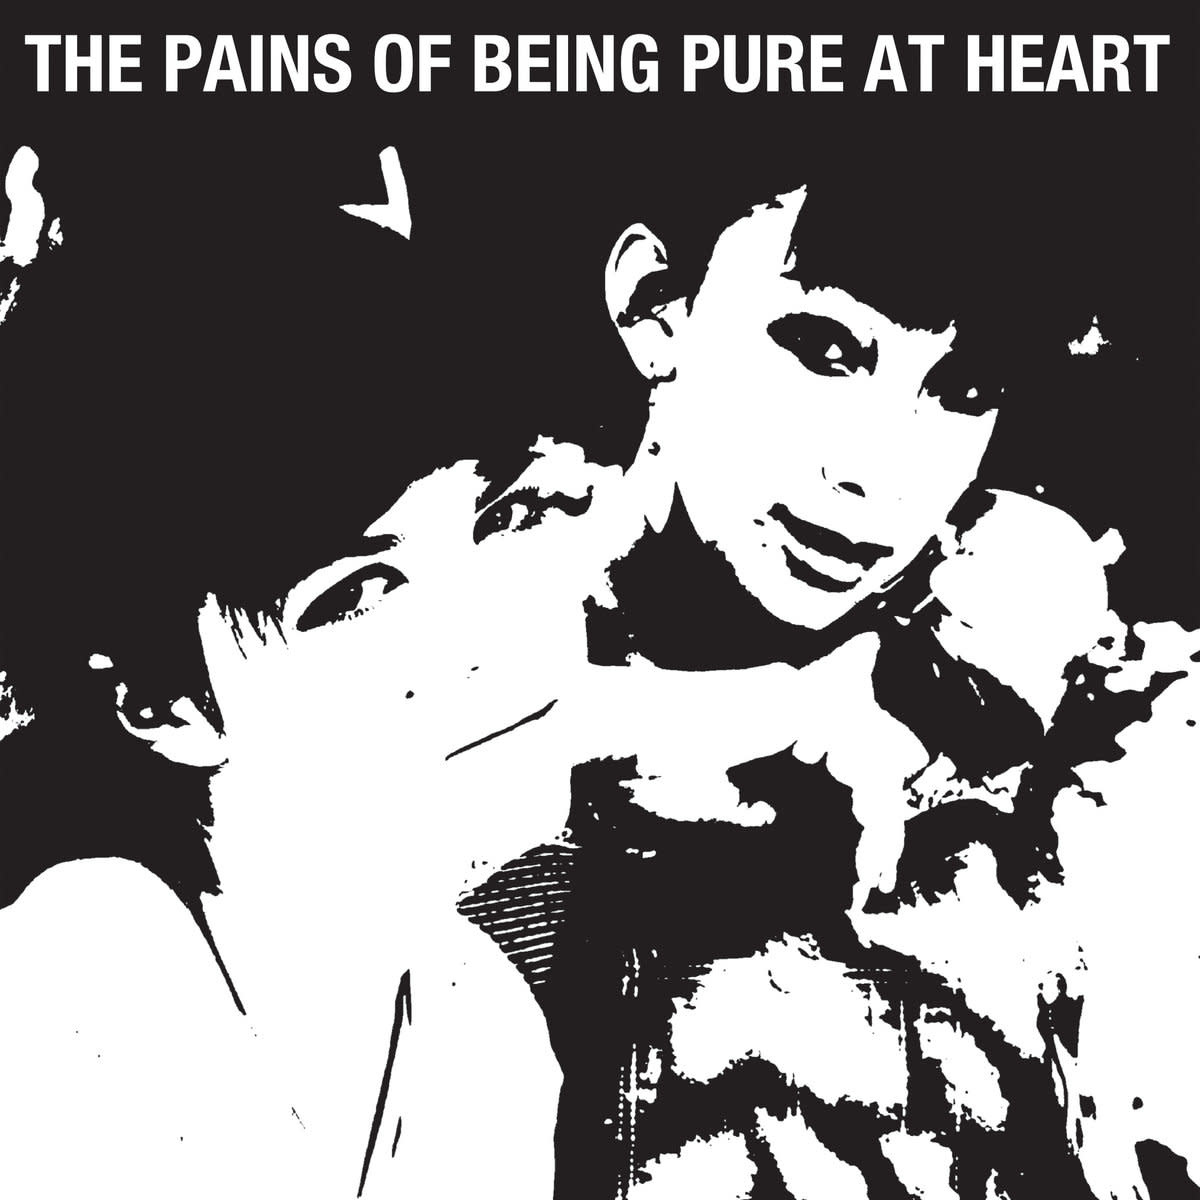 Slumberland Records The Pains Of Being Pure At Heart - The Pains Of Being Pure At Heart (White Vinyl)